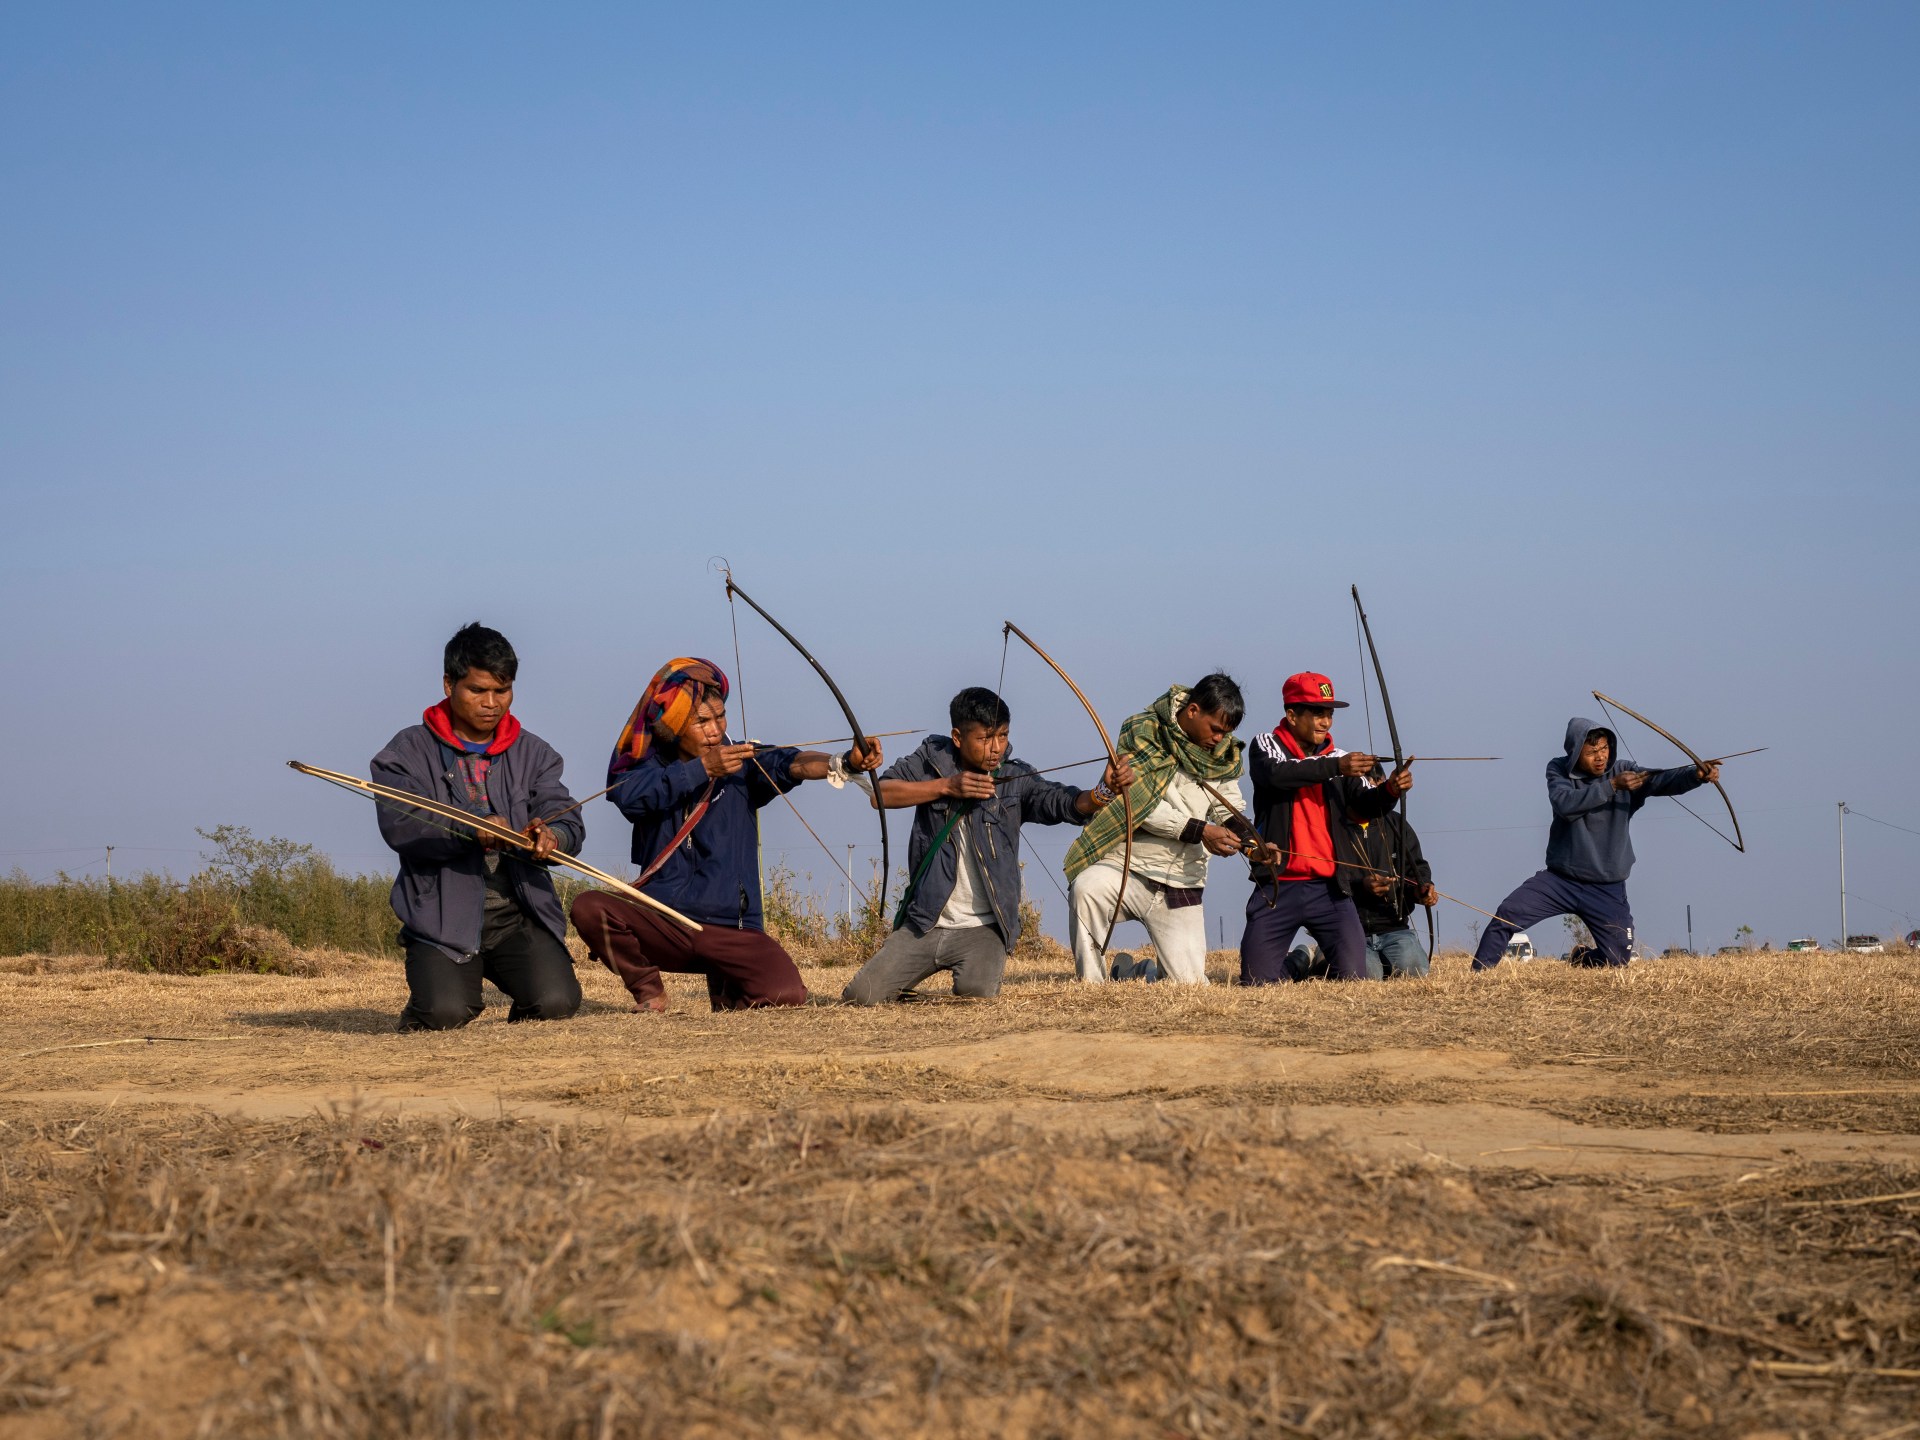 A thriving archery tradition in northeast India’s Meghalaya